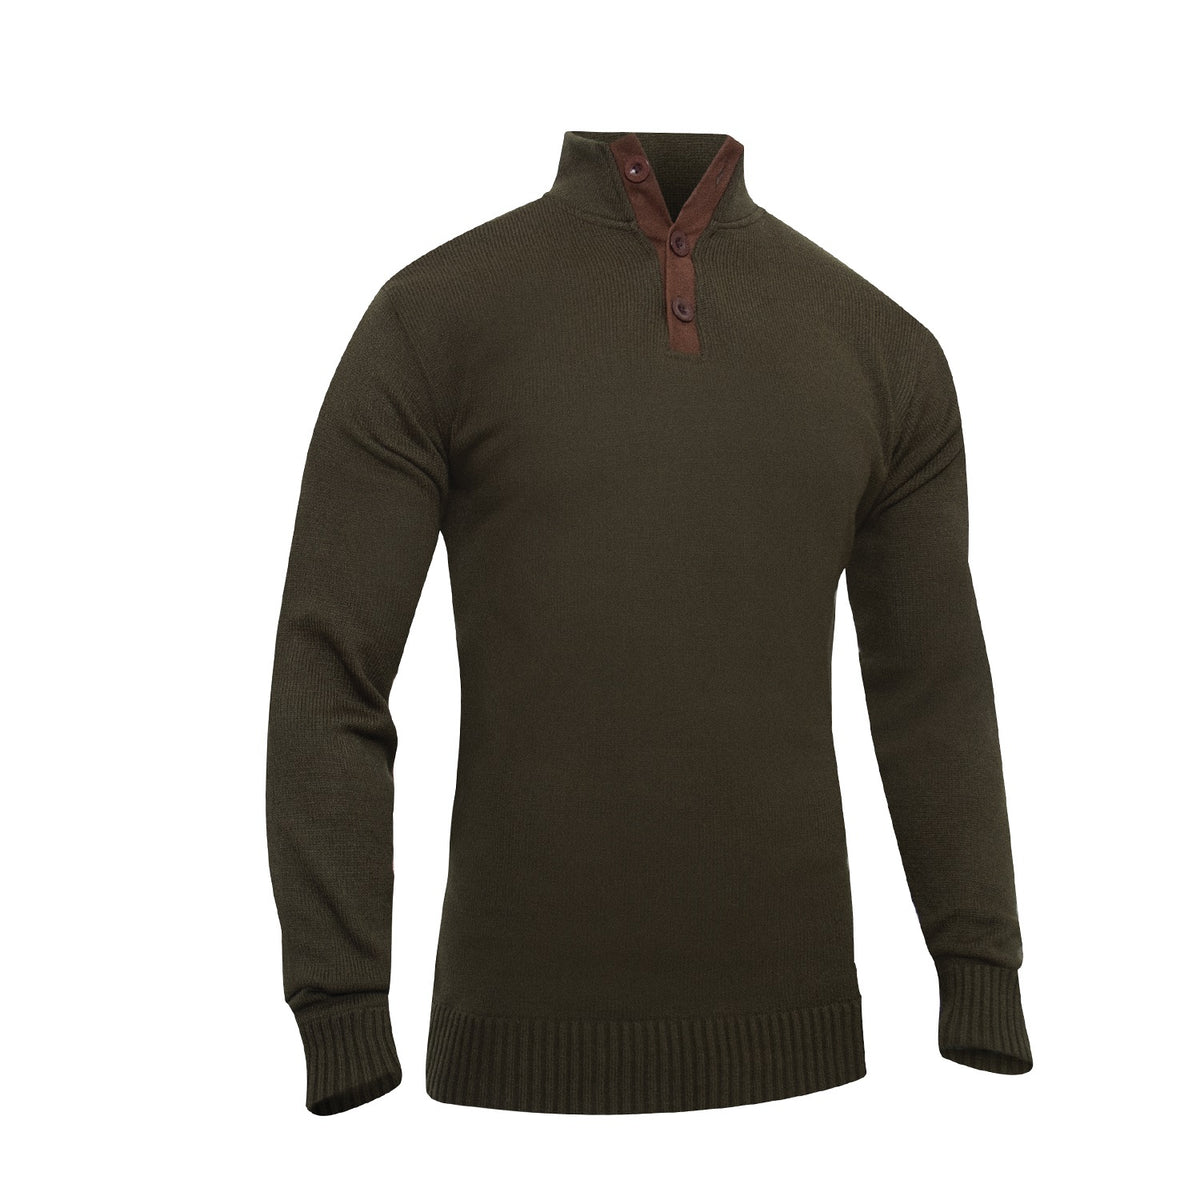 Rothco 3-Button Sweater With Suede Accents Olive Drab